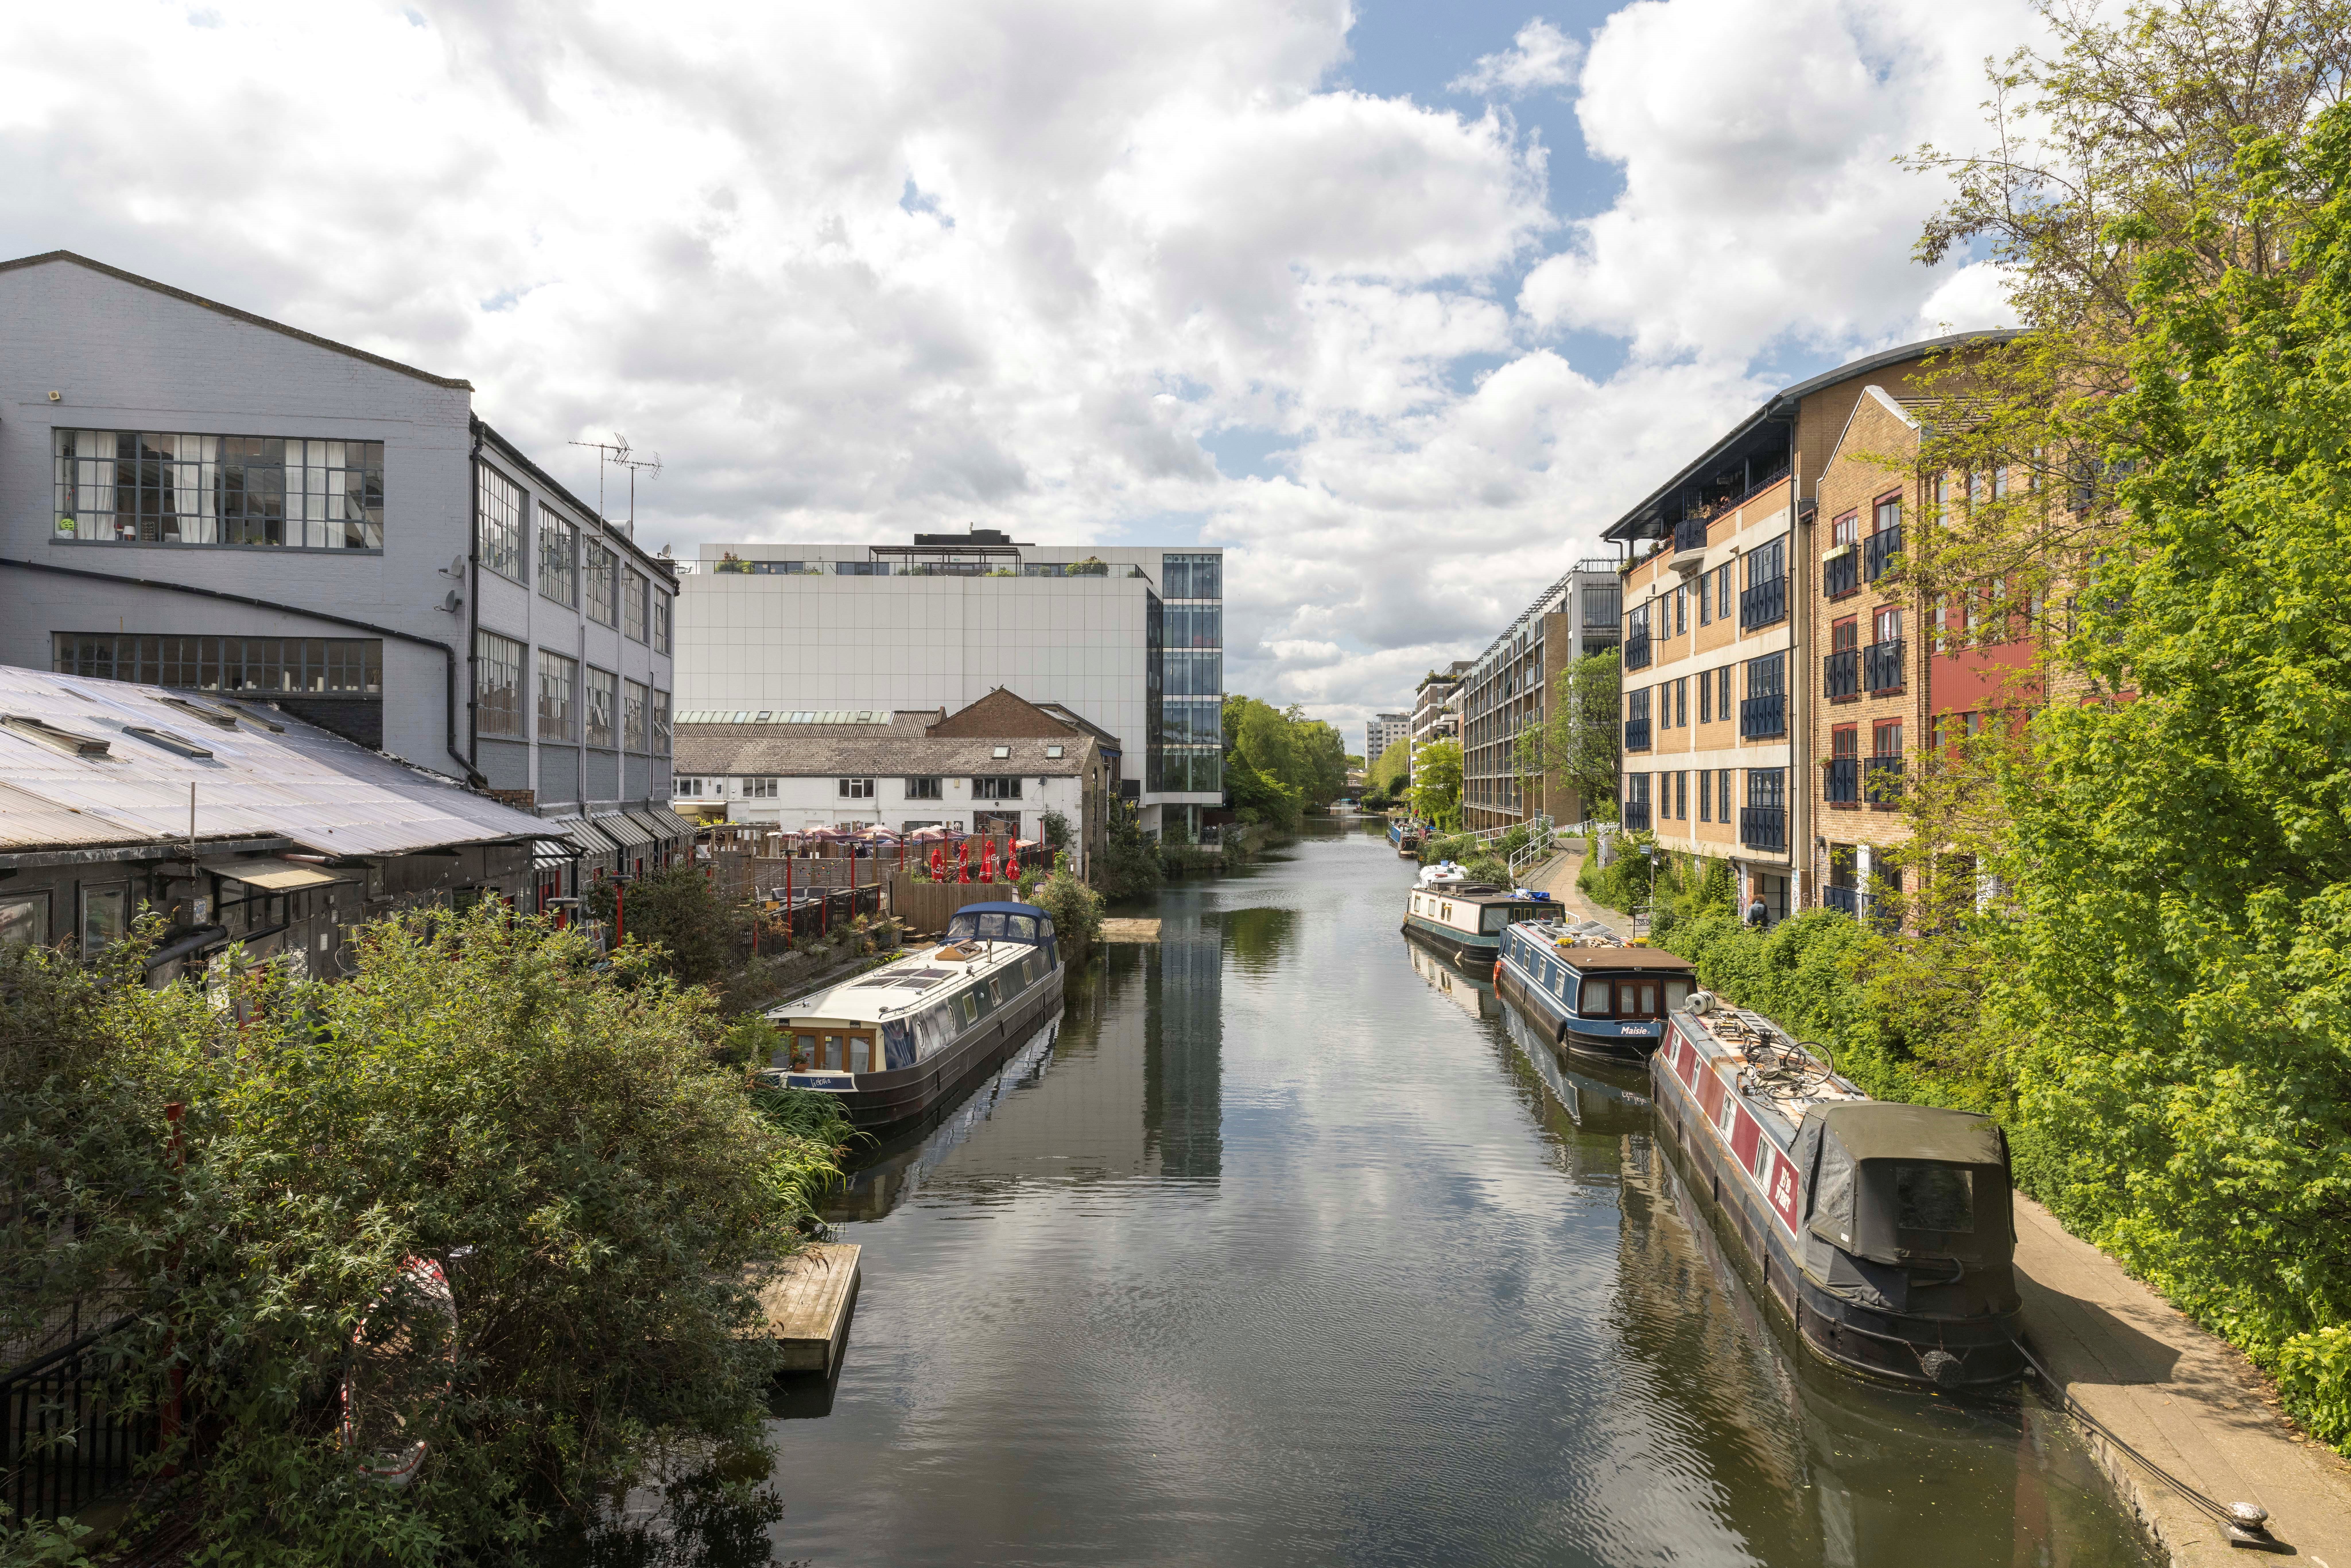 Boats in Regent's Canal bordered by appartment buildings and warehouses